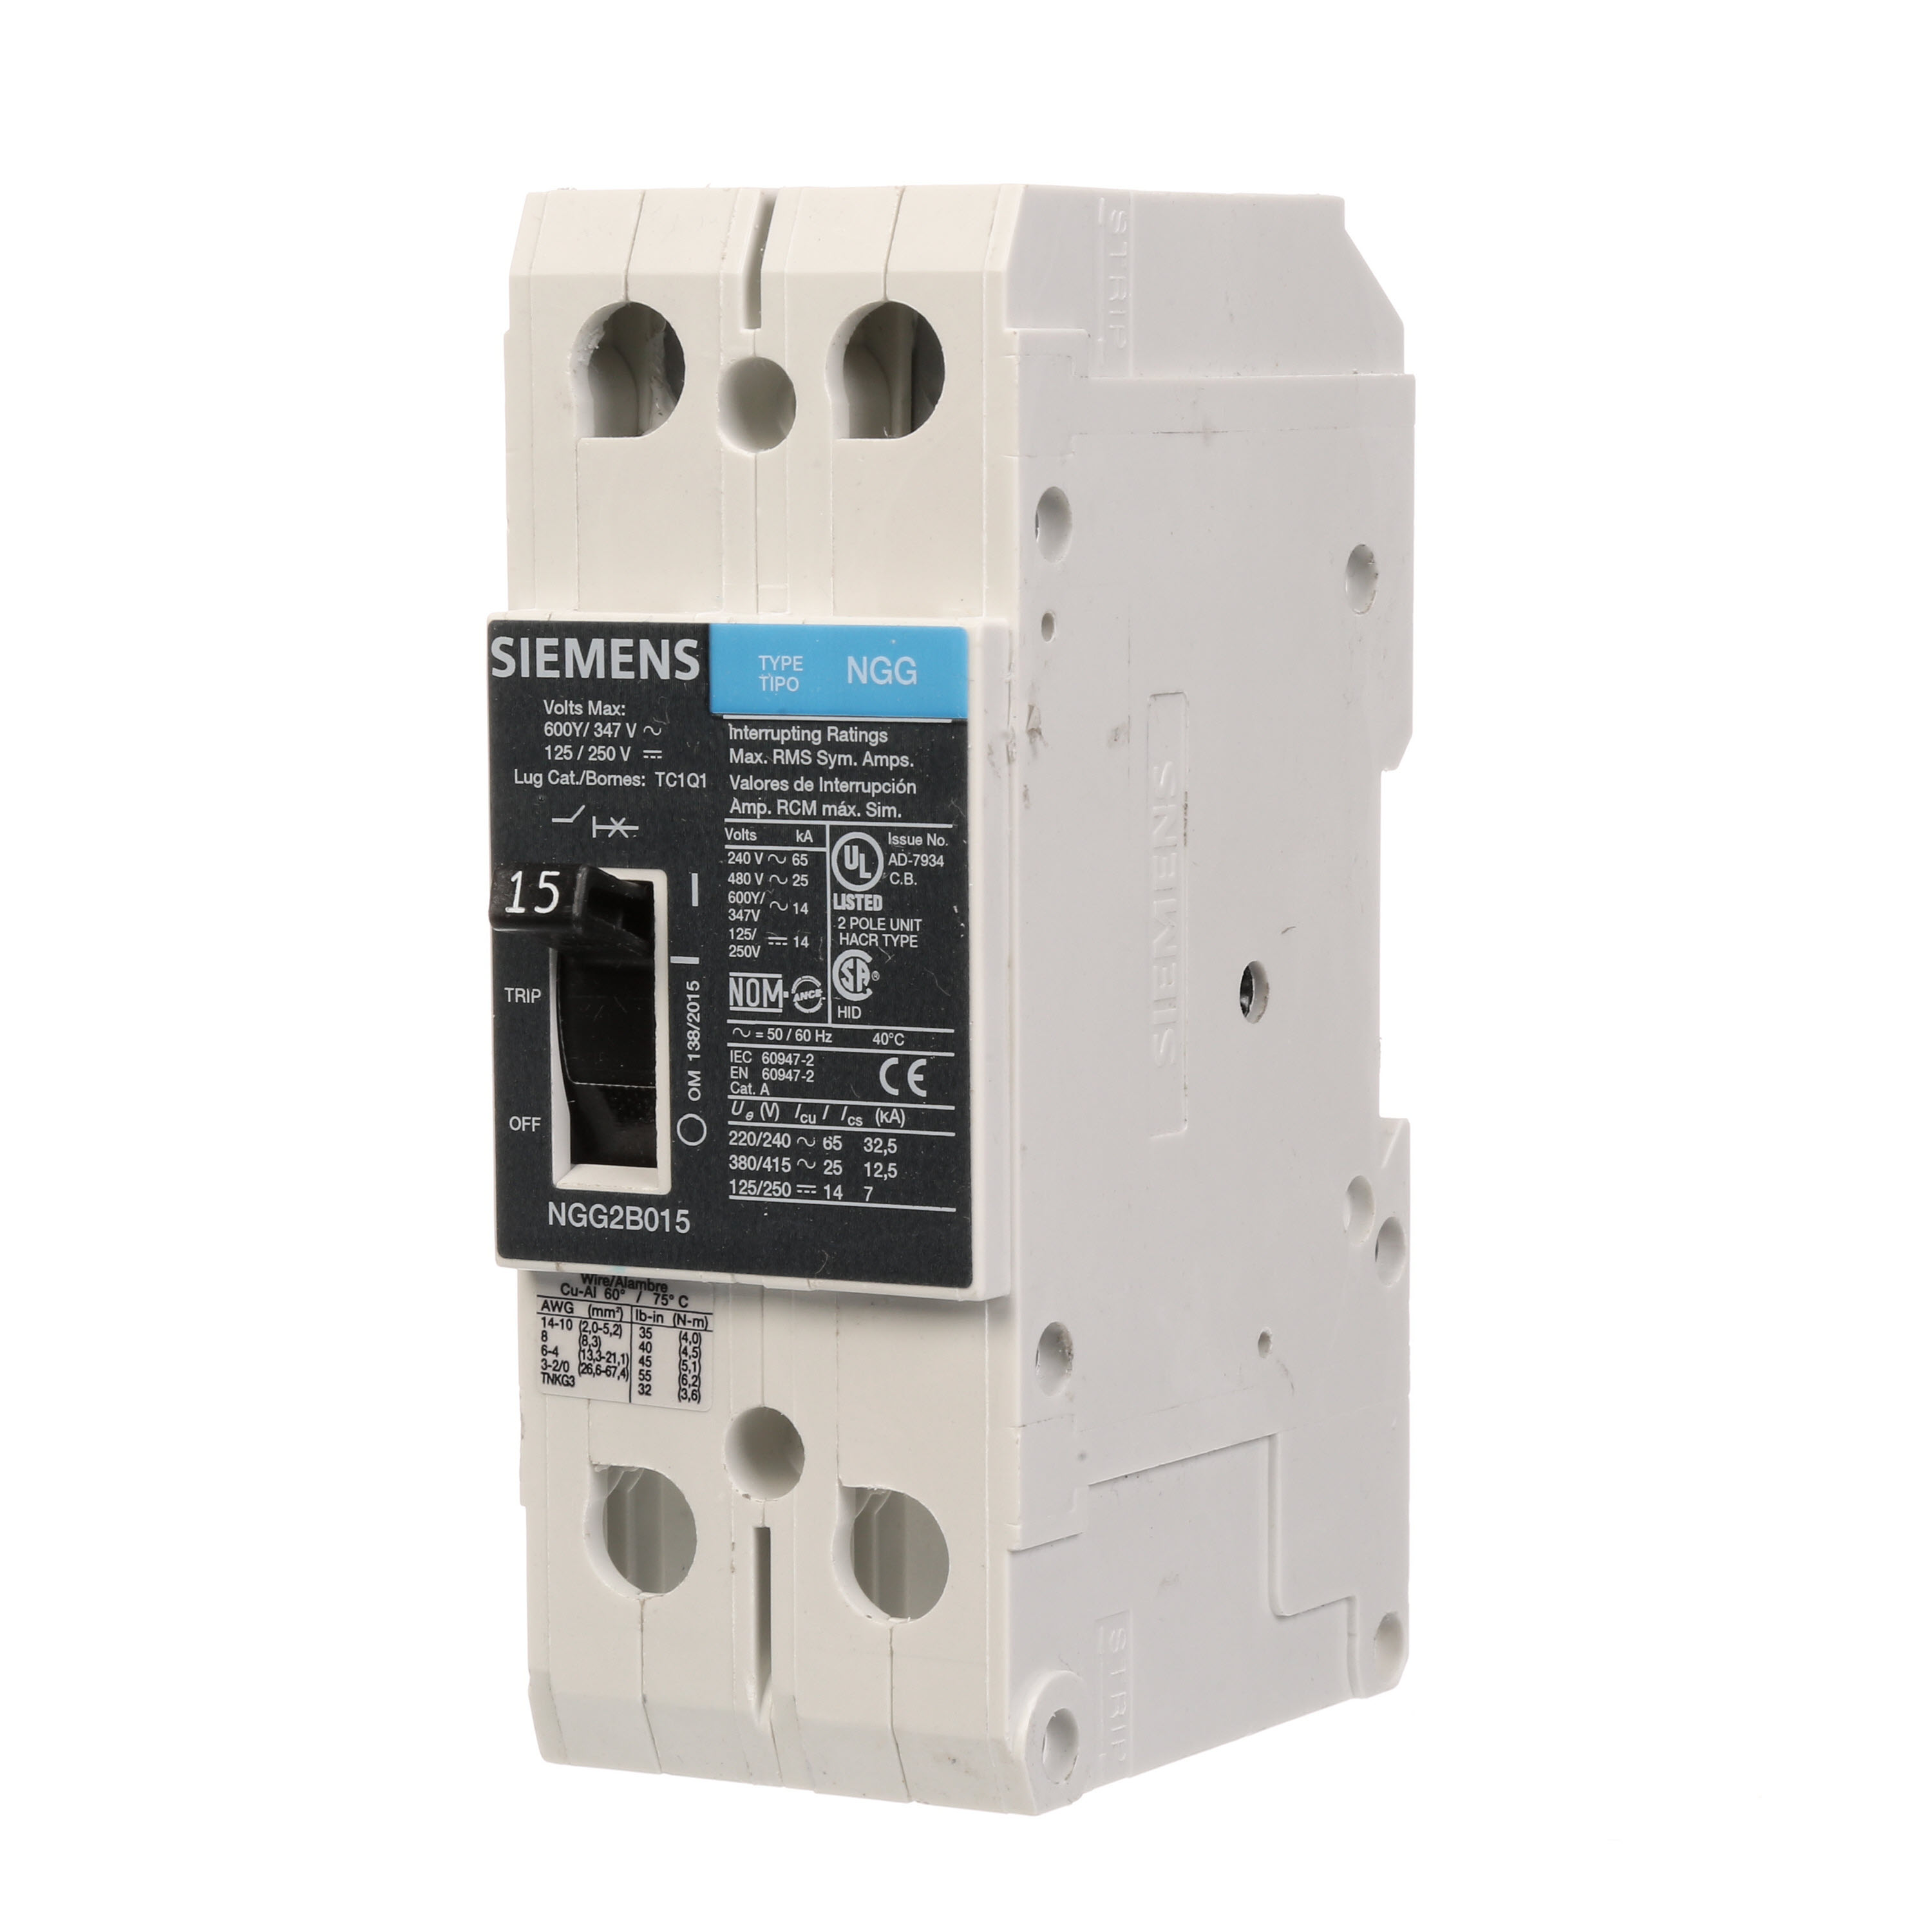 SIEMENS LOW VOLTAGE G FRAME CIRCUIT BREAKER WITH THERMAL - MAGNETIC TRIP. UL LISTED NGG FRAME WITH STANDARD BREAKING CAPACITY. 15A 2-POLE (14KAIC AT 600Y/347V)(25KAIC AT 480V). SPECIAL FEATURES MOUNTS ON DIN RAIL / SCREW, NO LUGS. DIMENSIONS (W x H x D) IN 2 x 5.4 x 2.8.